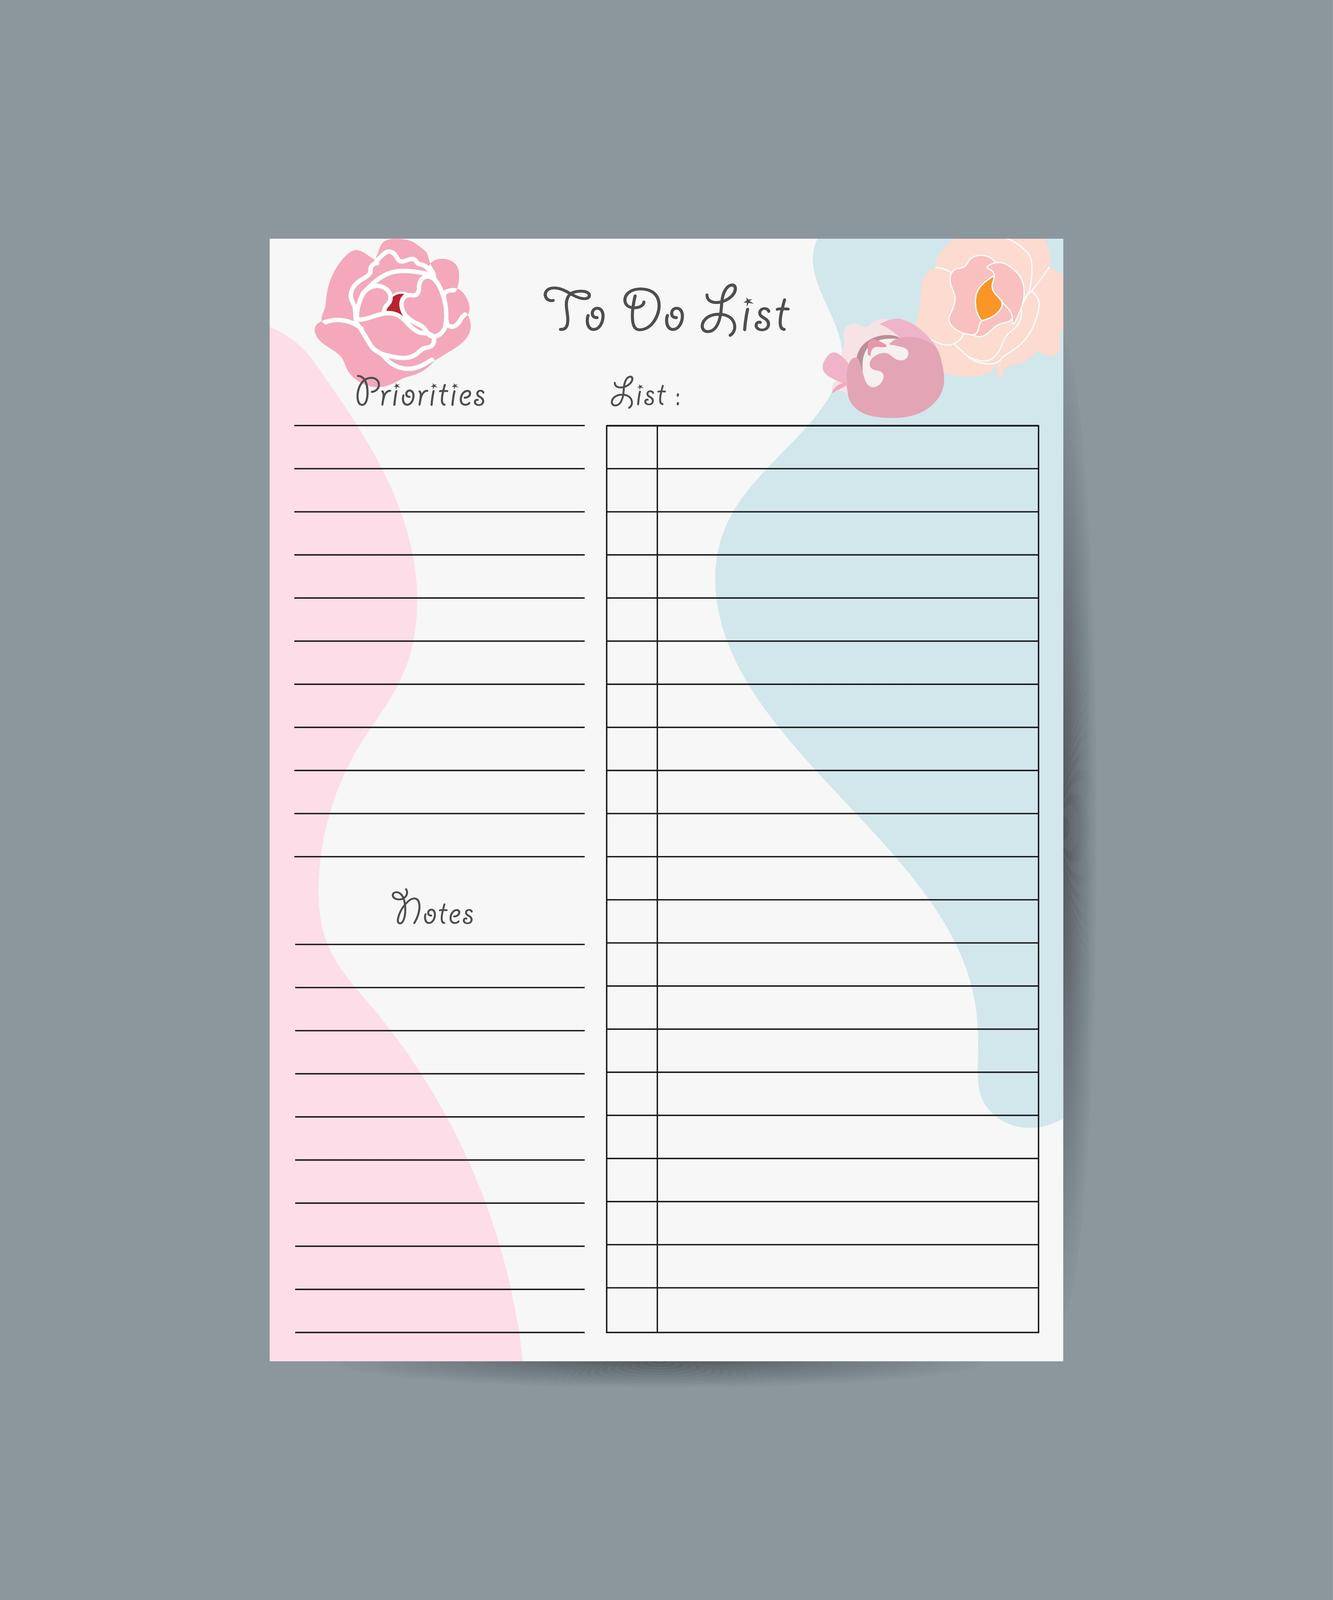 checklist, daily plan. To do list planning schedule work time management vector illustration by ANITA